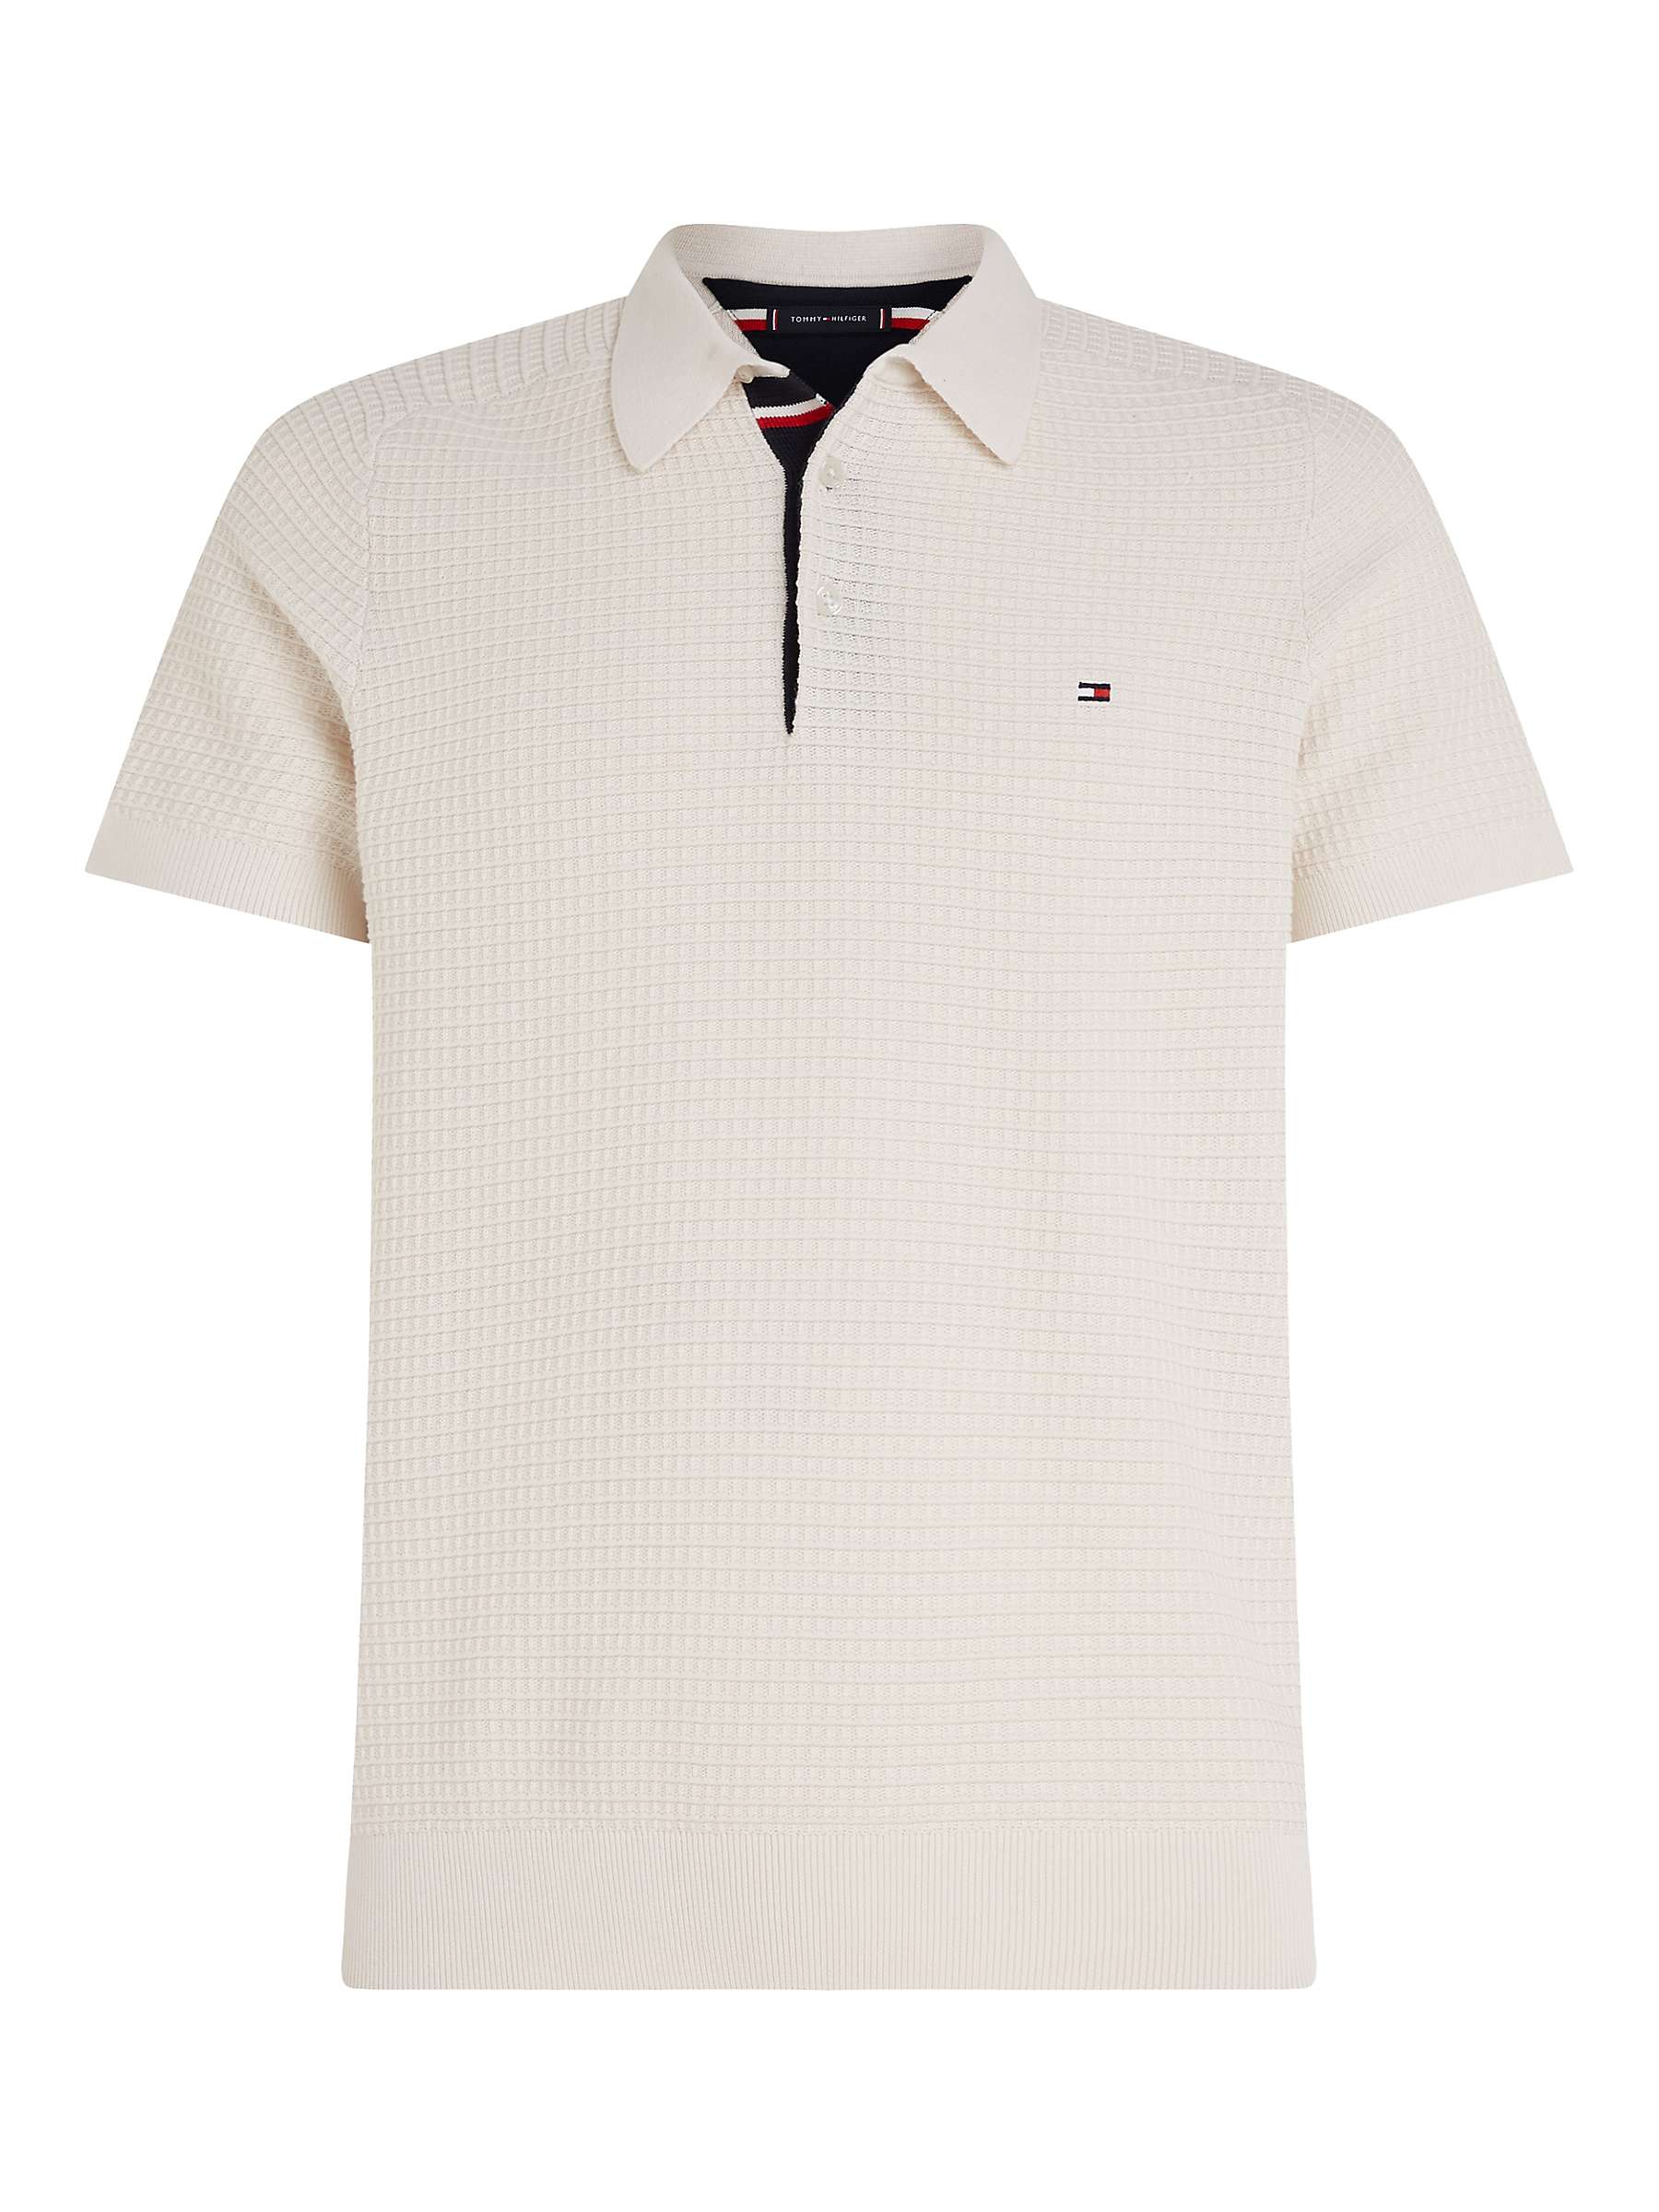 Buy Tommy Hilfiger Textured Organic Cotton Spring Polo Shirt Online at johnlewis.com